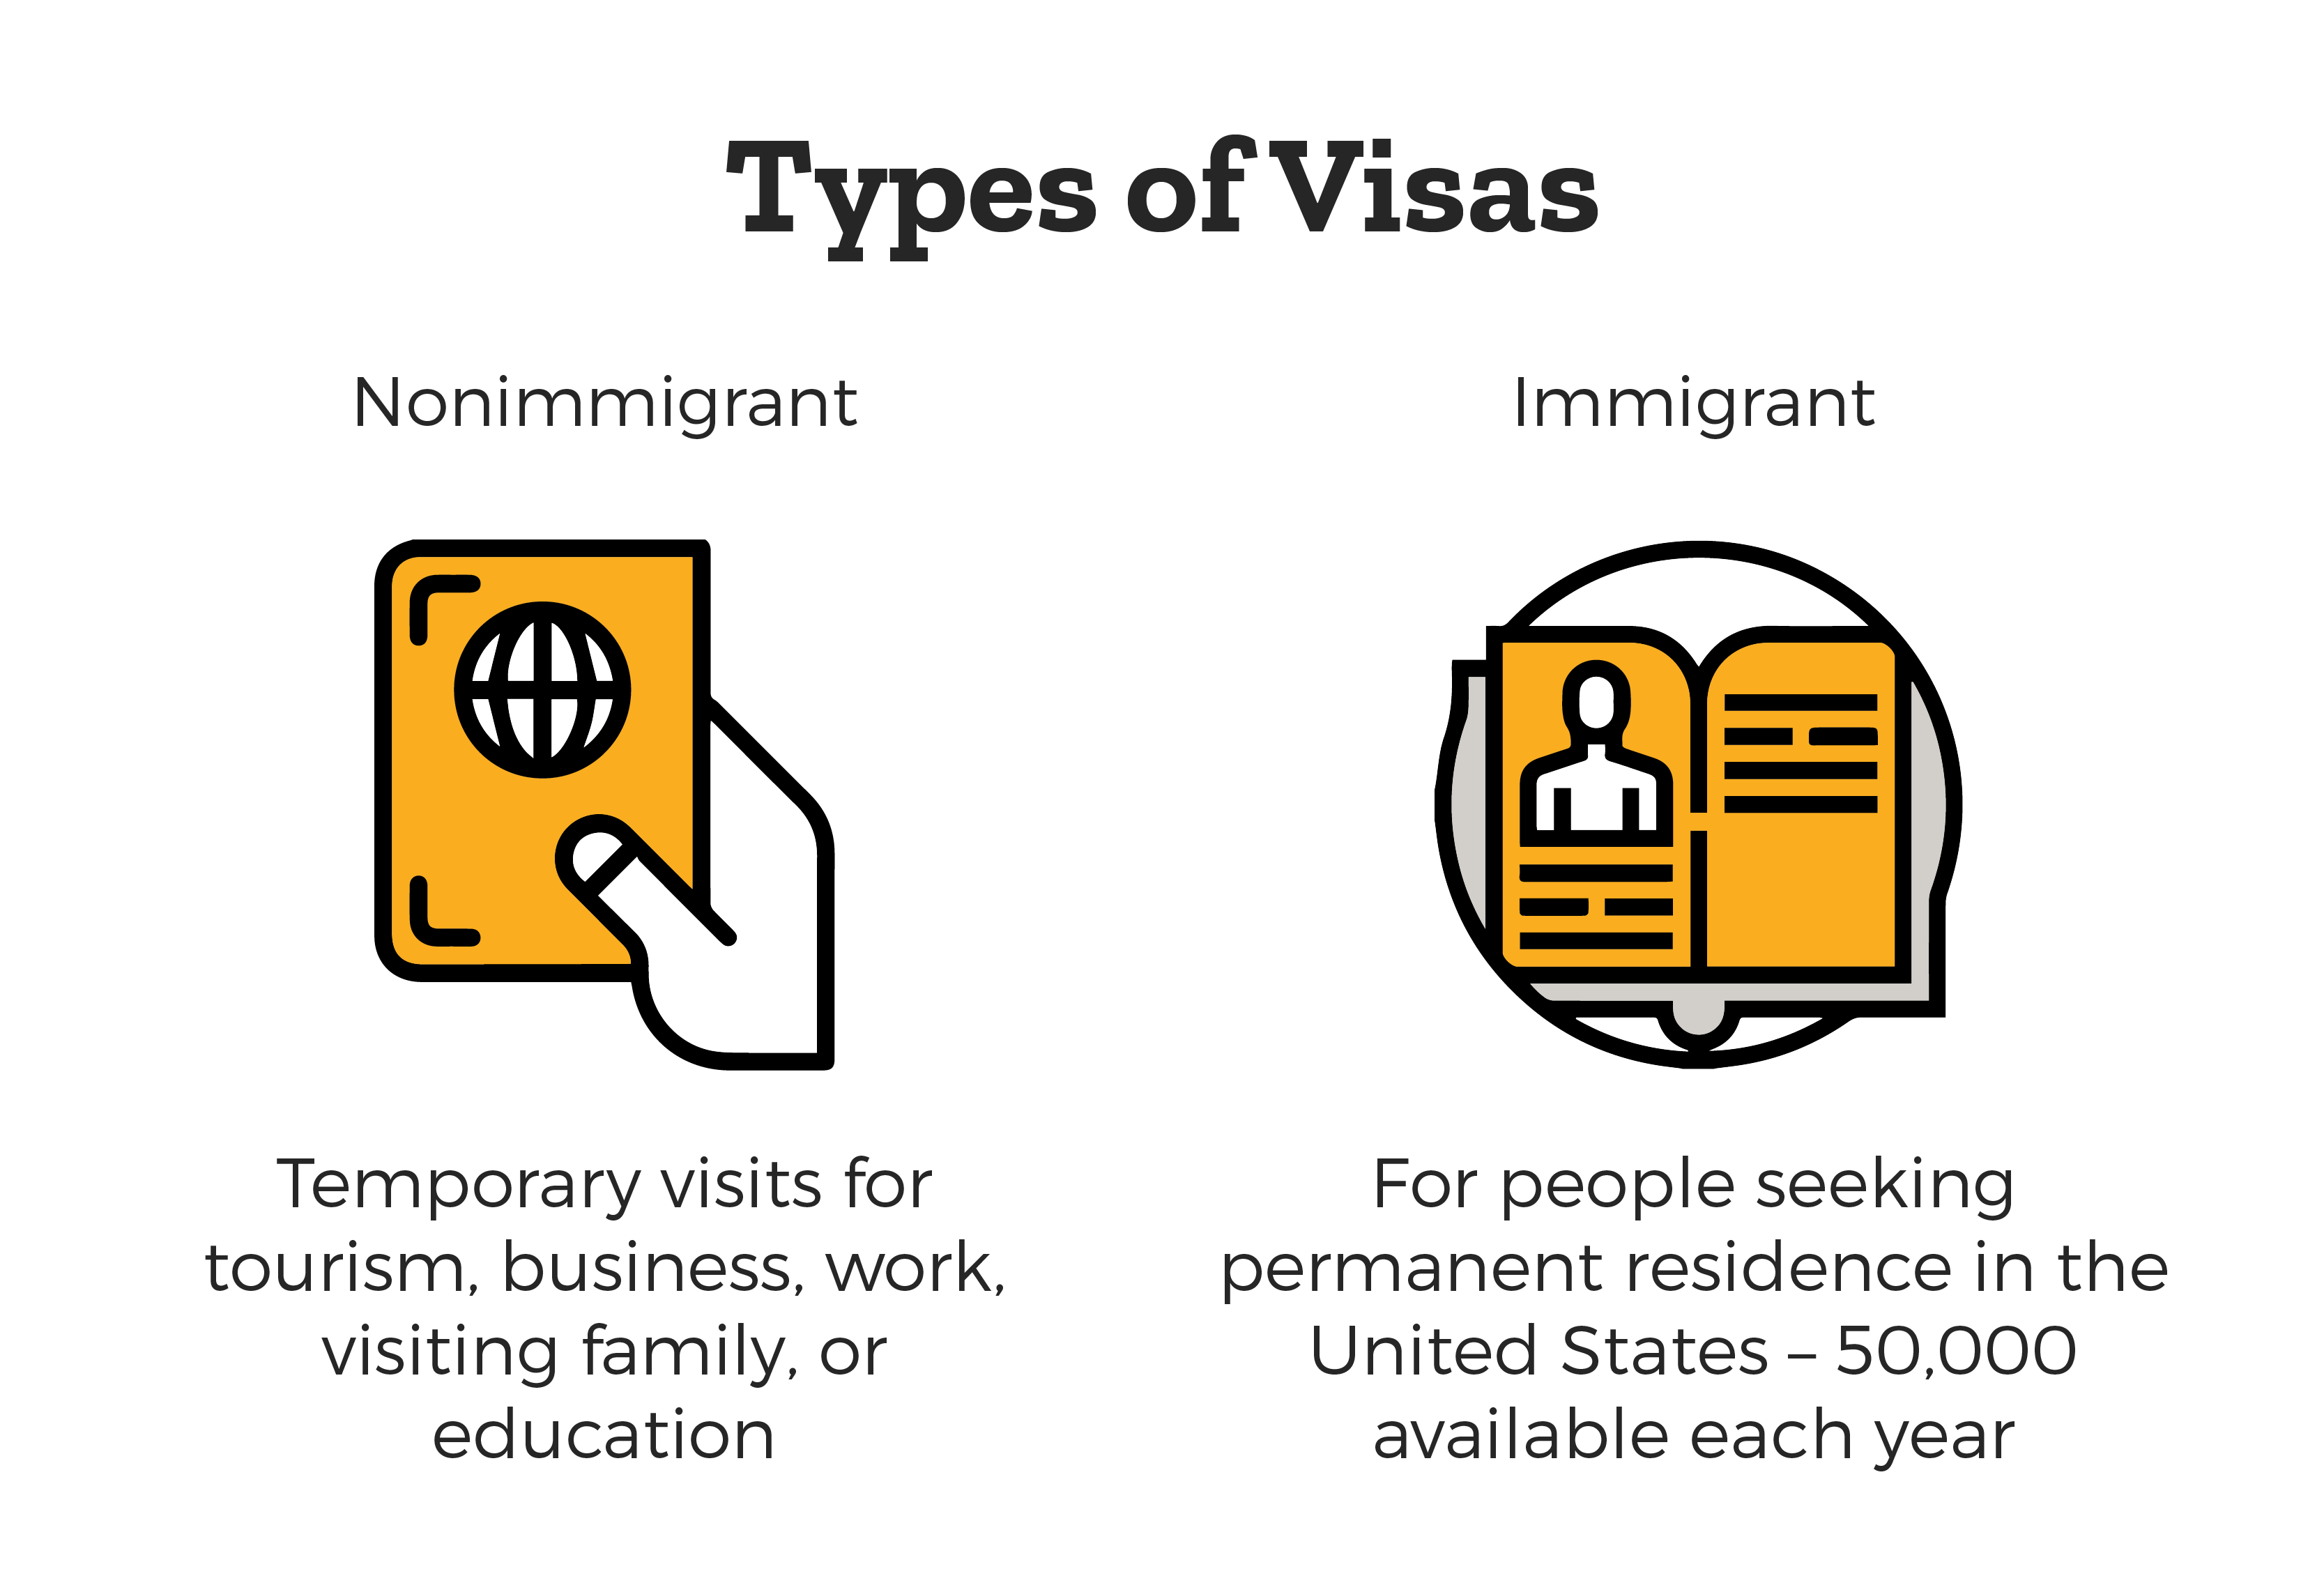 Types of United States Visas - Nonimmigrant which means temporary visits for tourism, business, work, visiting family, or education. Immigrant which is for people seeking permanent residence in the United States - 50,000 available each year.